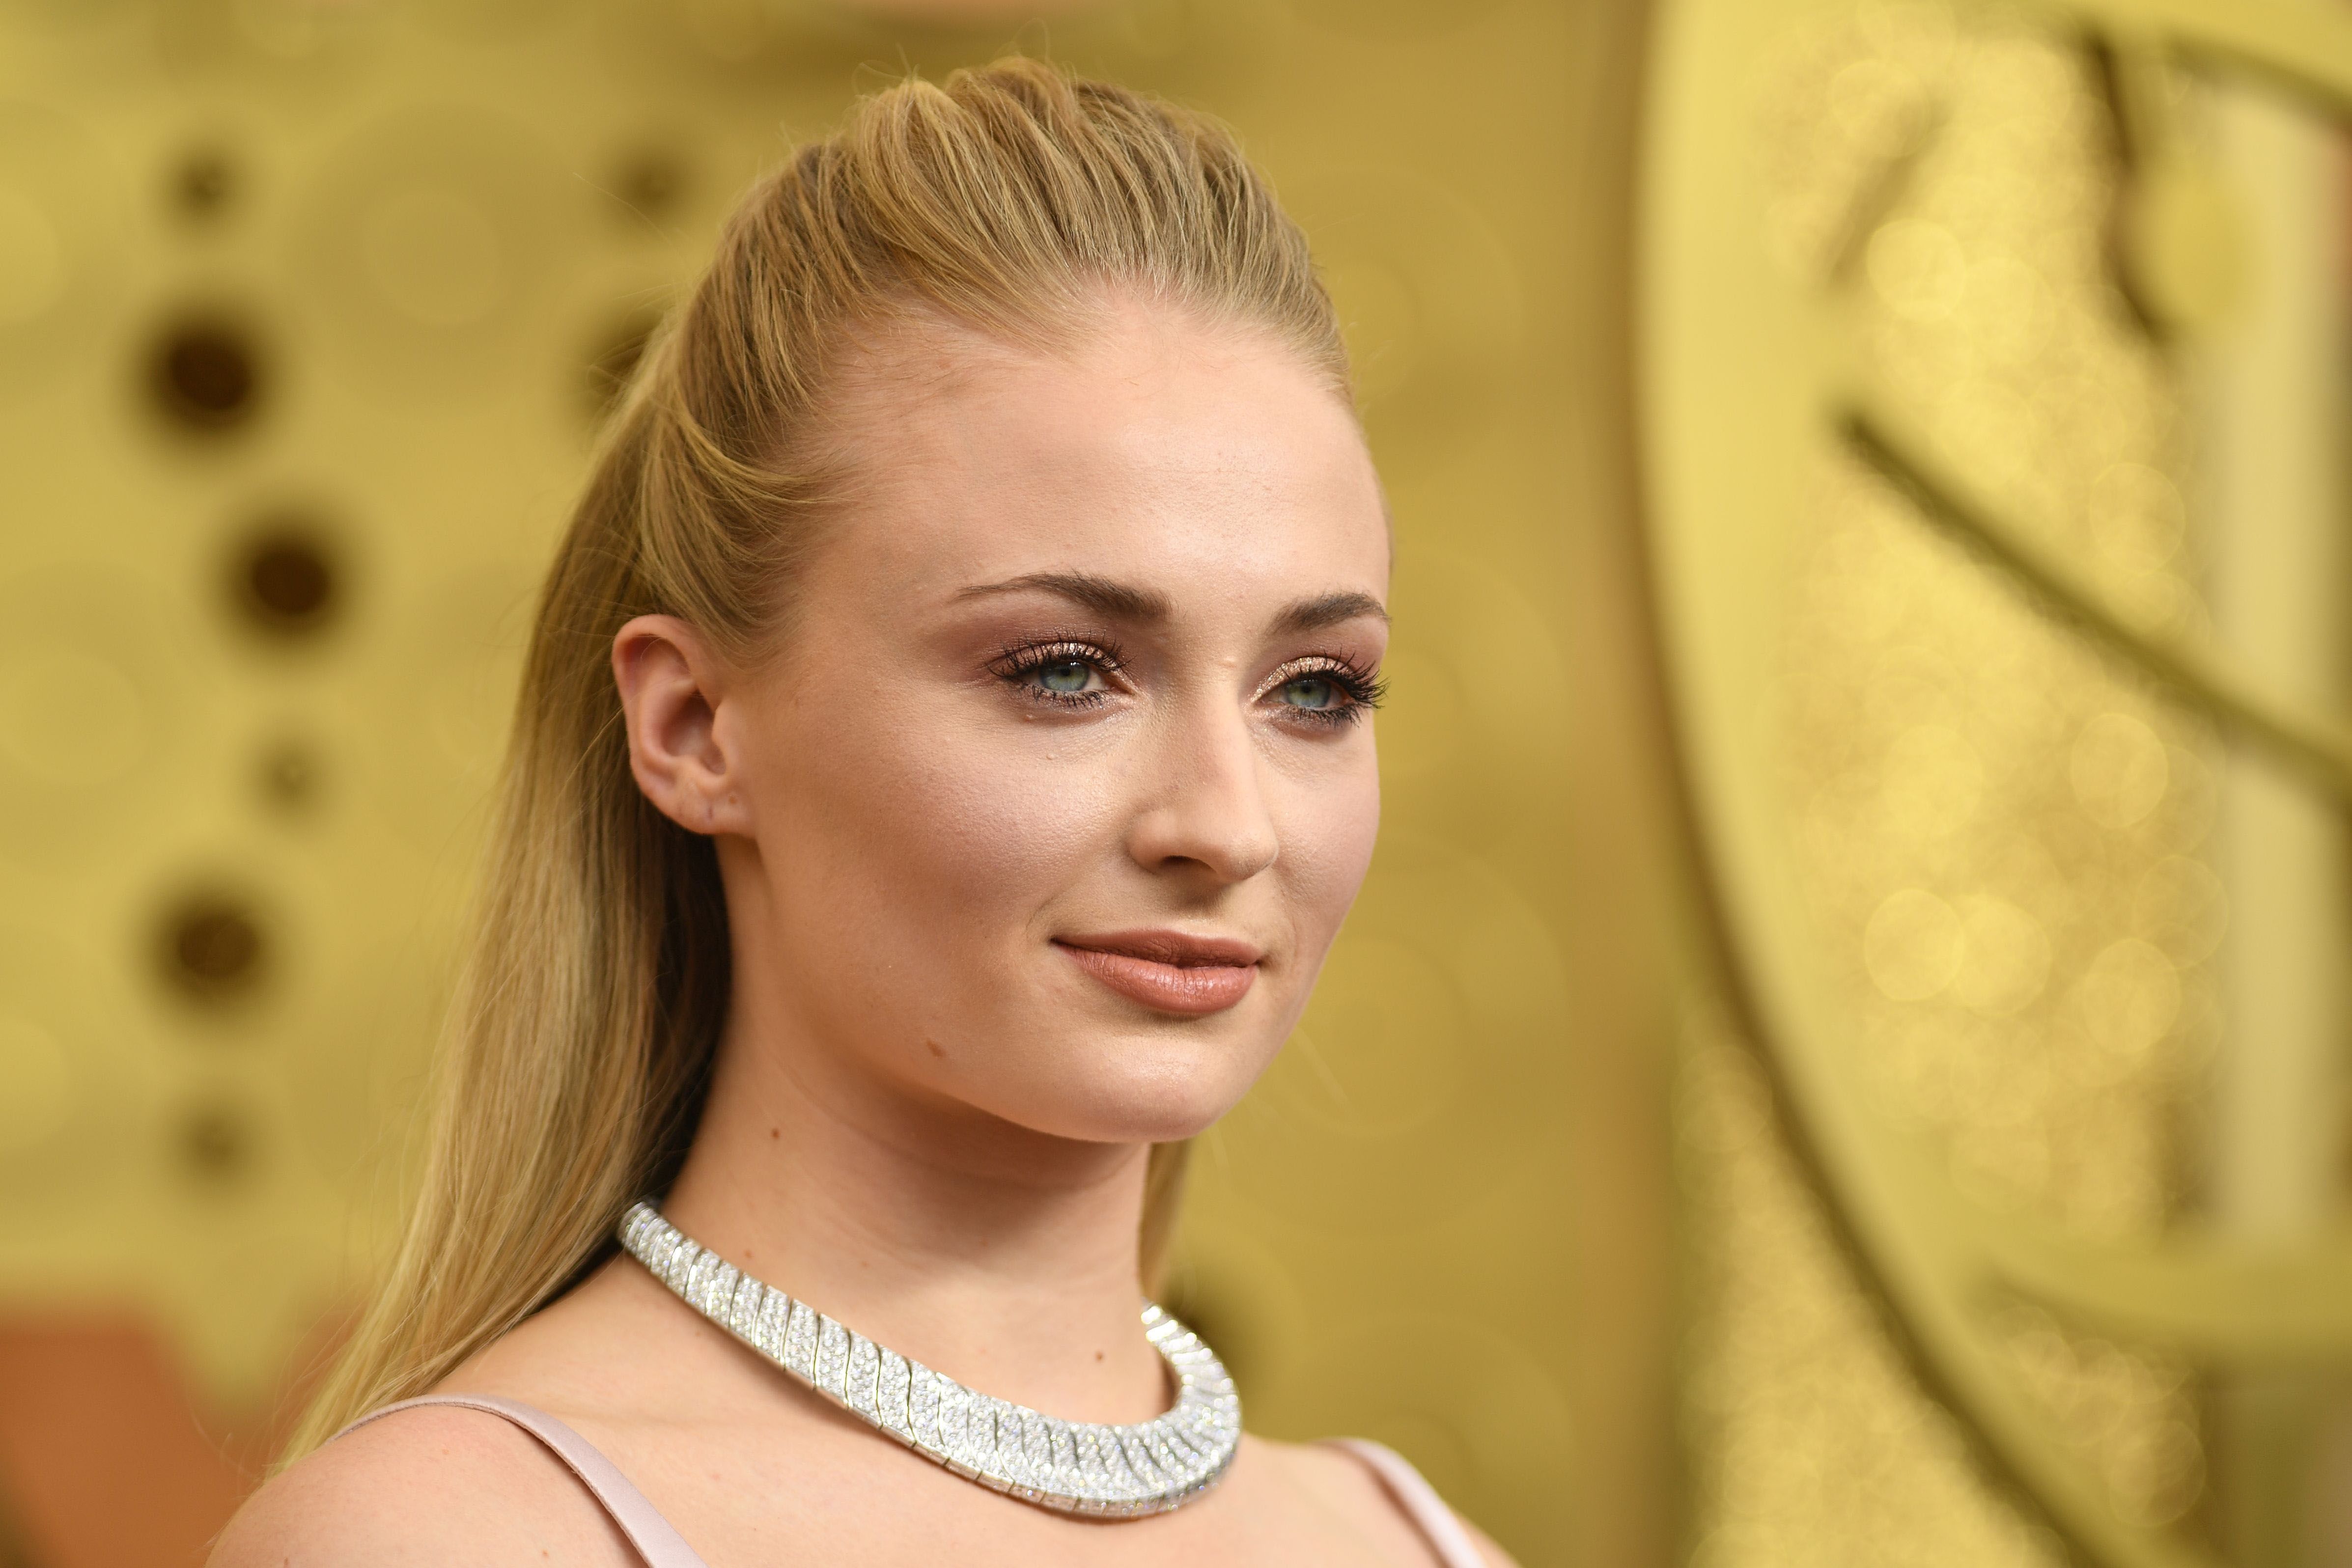 Sophie Turner Regrets the Blazer Outfit She Wore to Kit